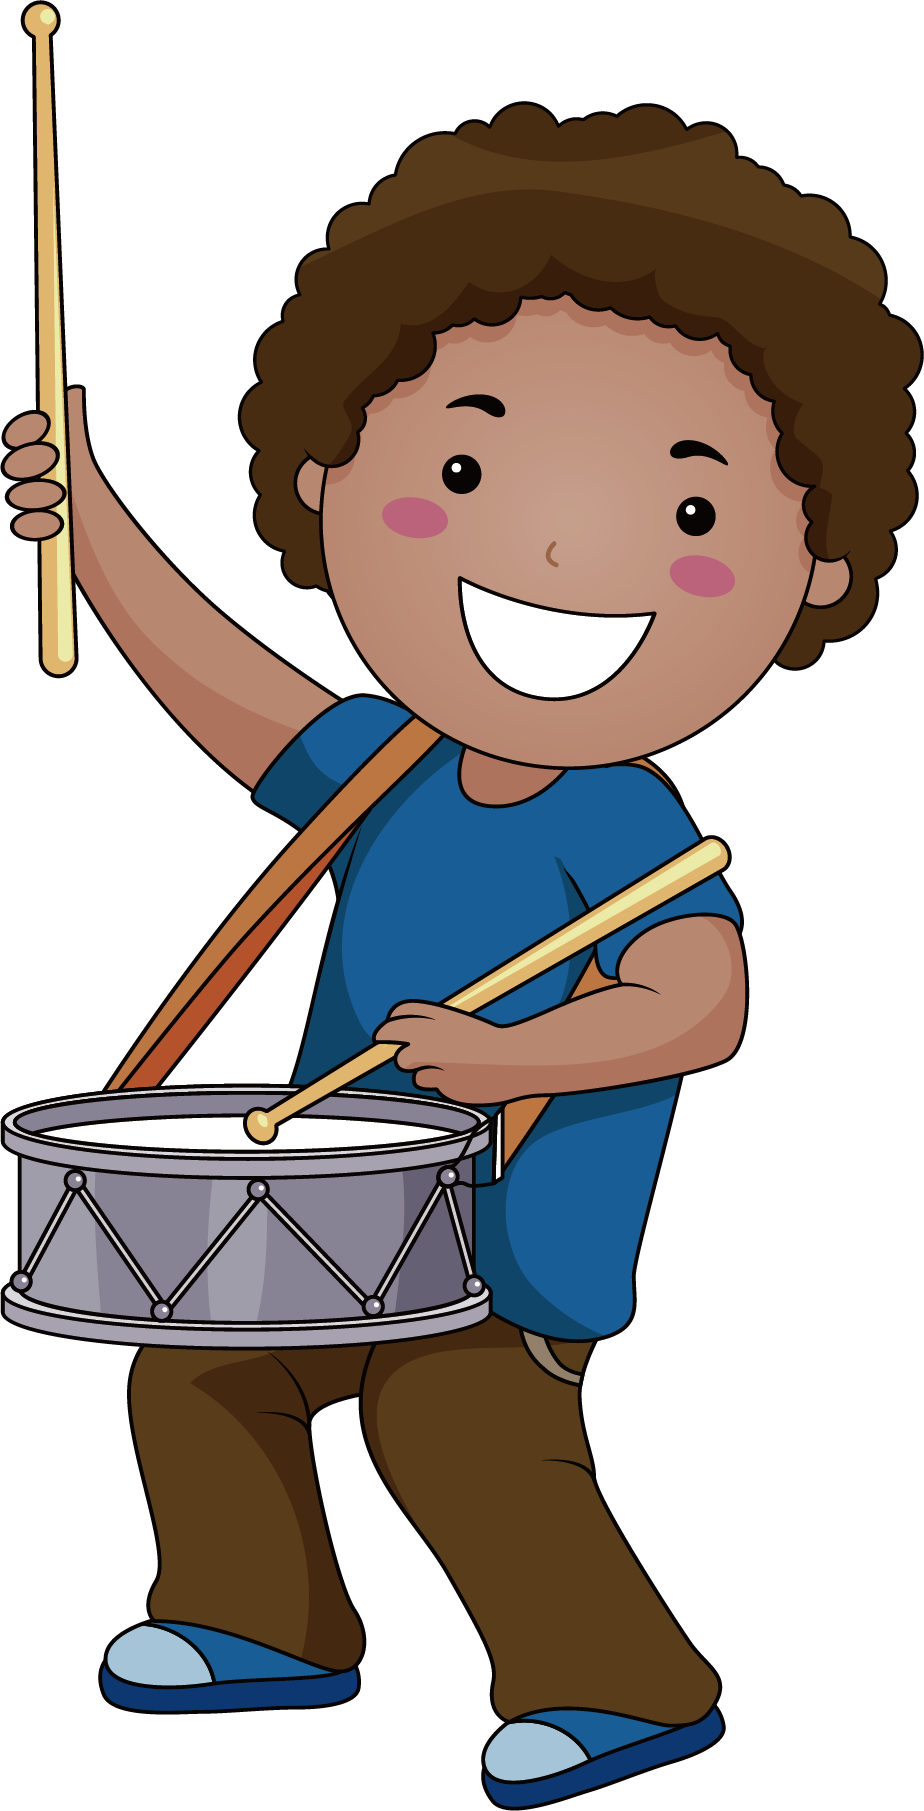 Musical instrument Drawing Clip art - Drum boy boy cartoon poster  promotional material png download - 924*1811 - Free Transparent png  Download. - Clip Art Library